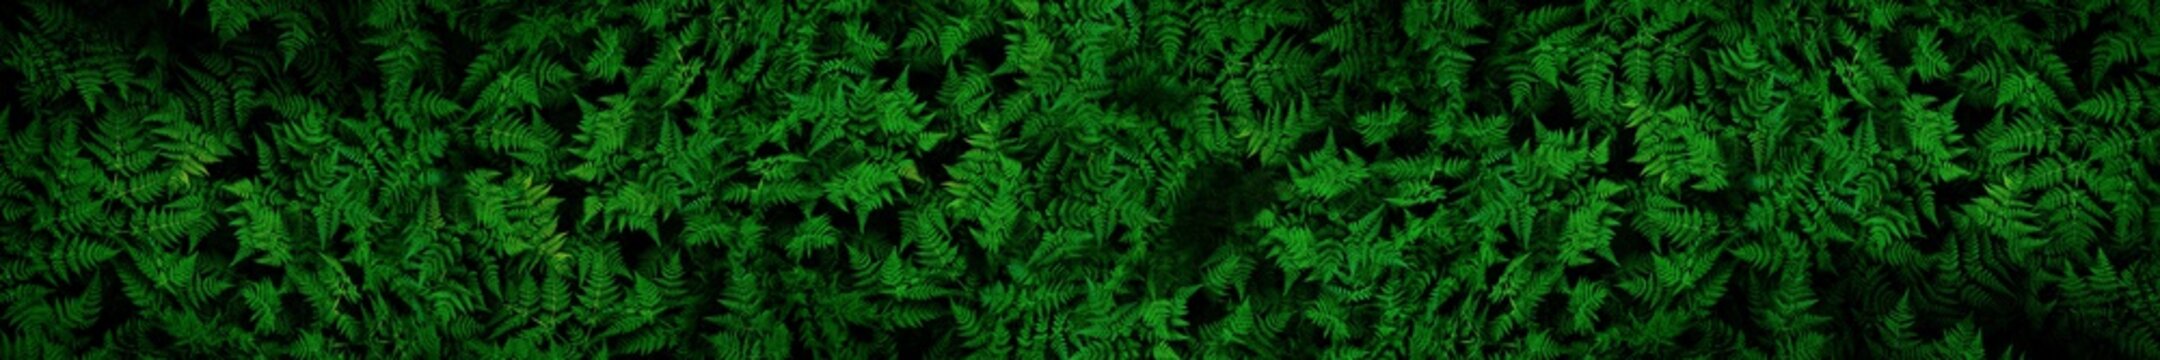 Very detailed and natural, lush, green ferns background